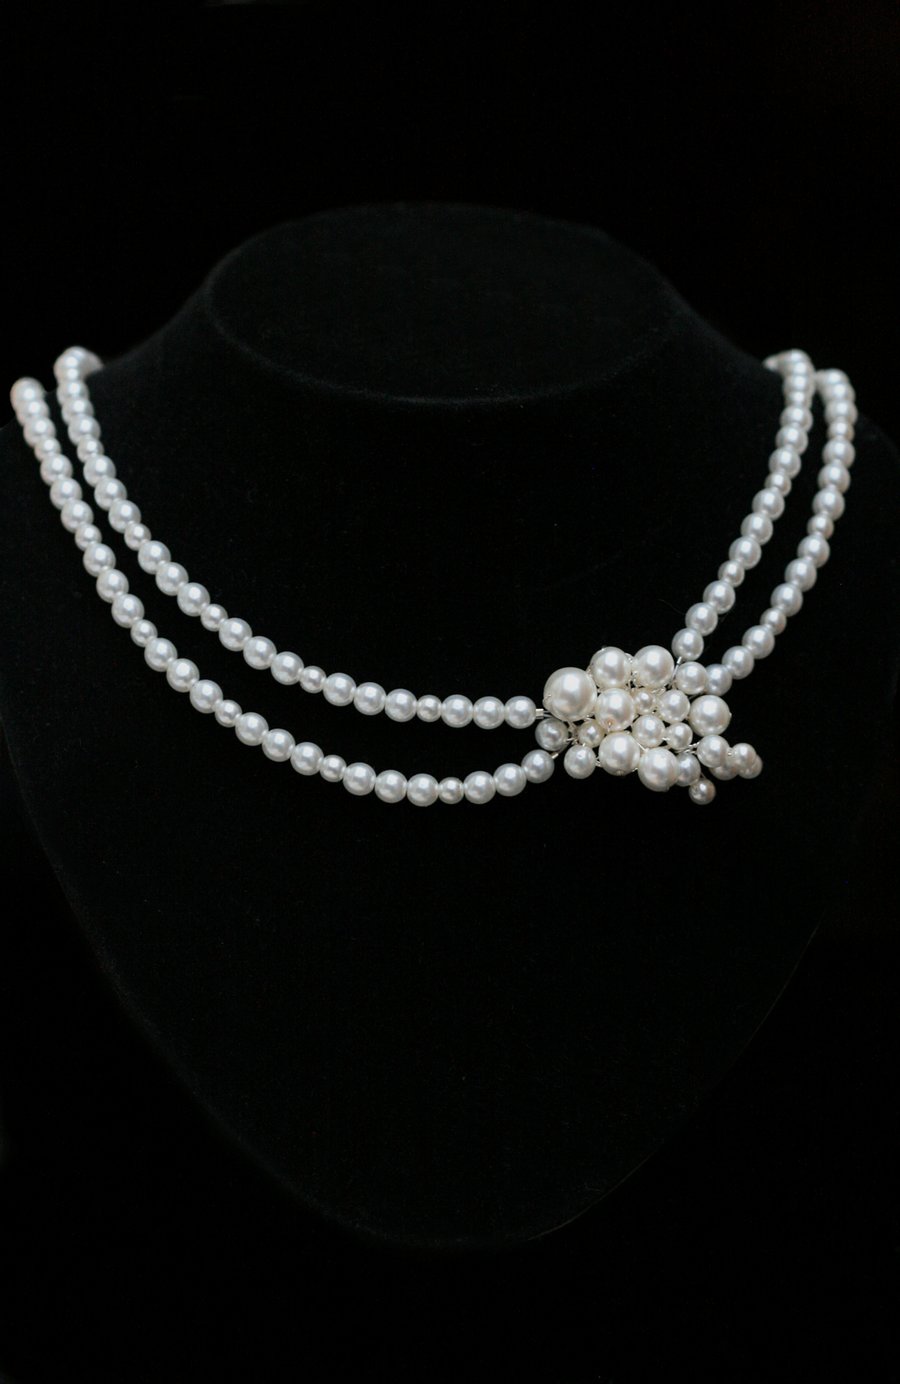 Vintage Style Silver Bridal Asymmetric Pearl Necklace, Ivory, White or Cream